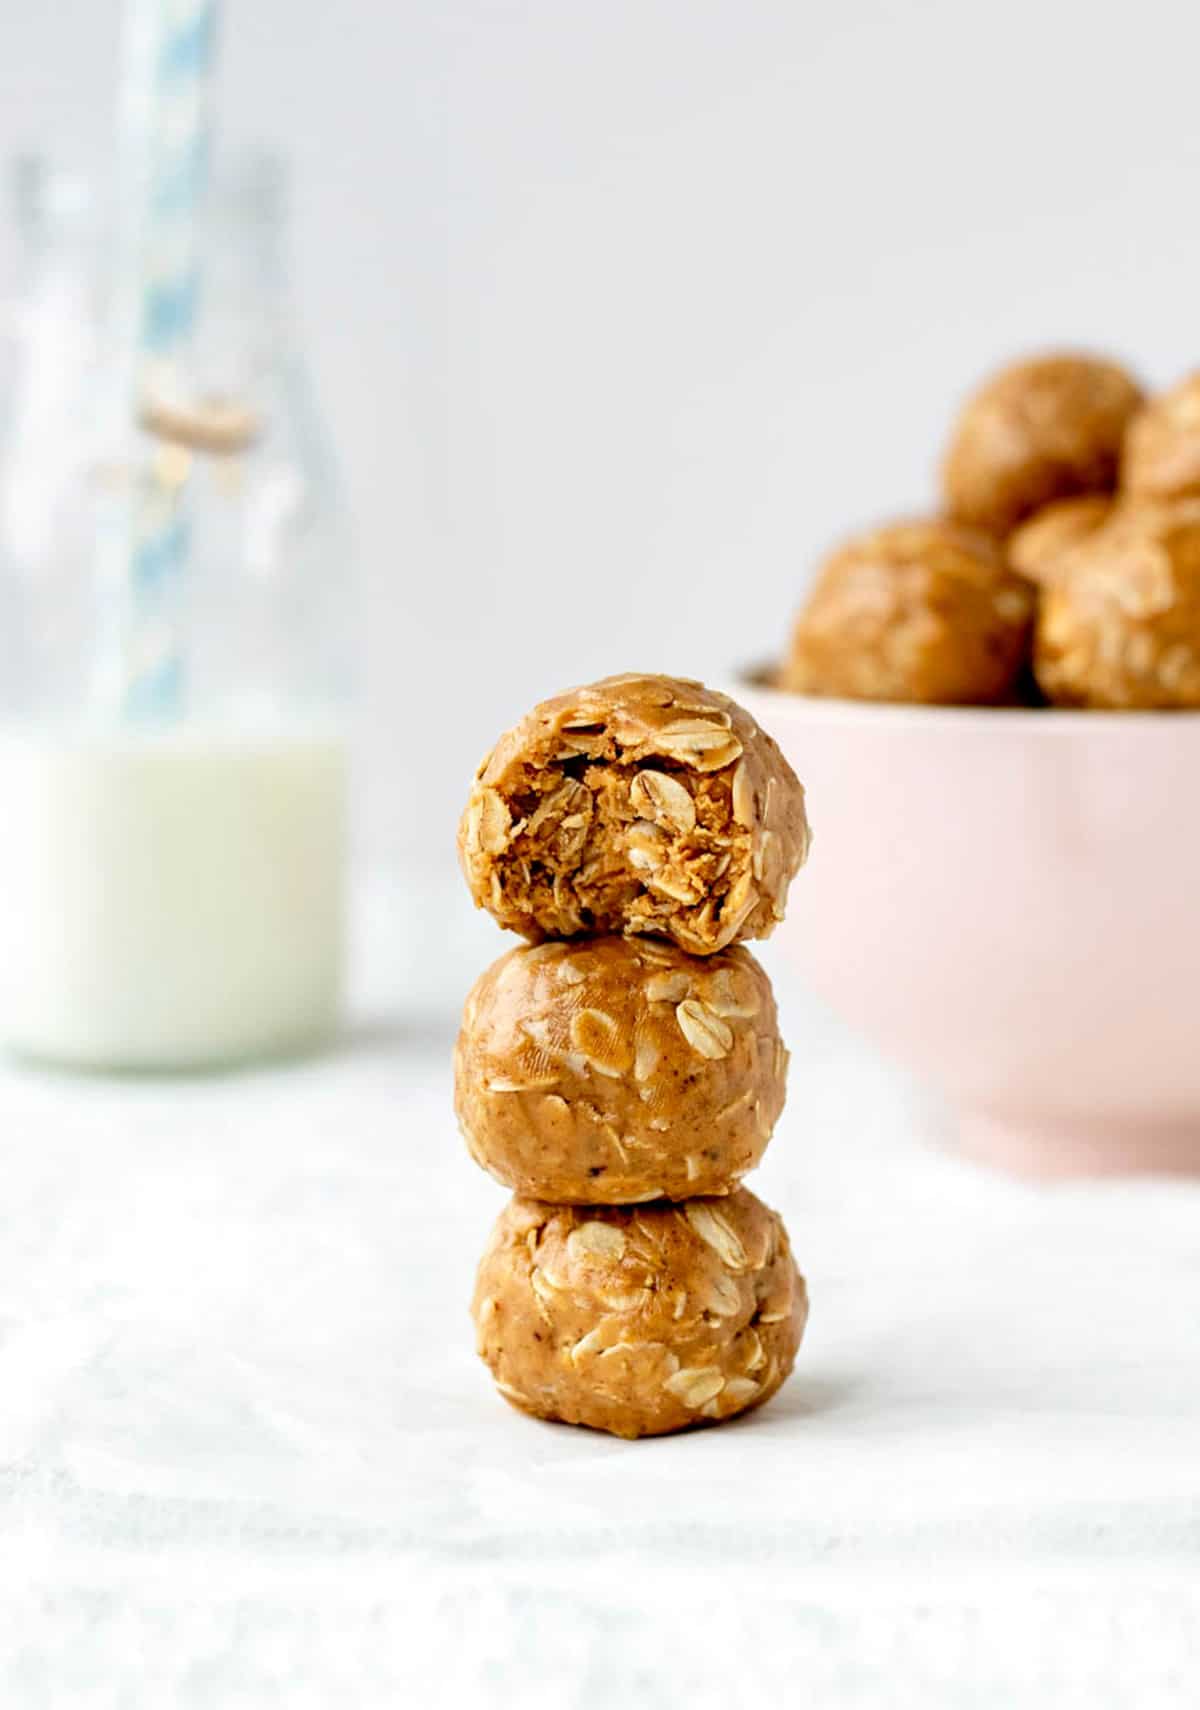 A stack of three peanut butter oatmeal balls with a bite taken out of the top one.